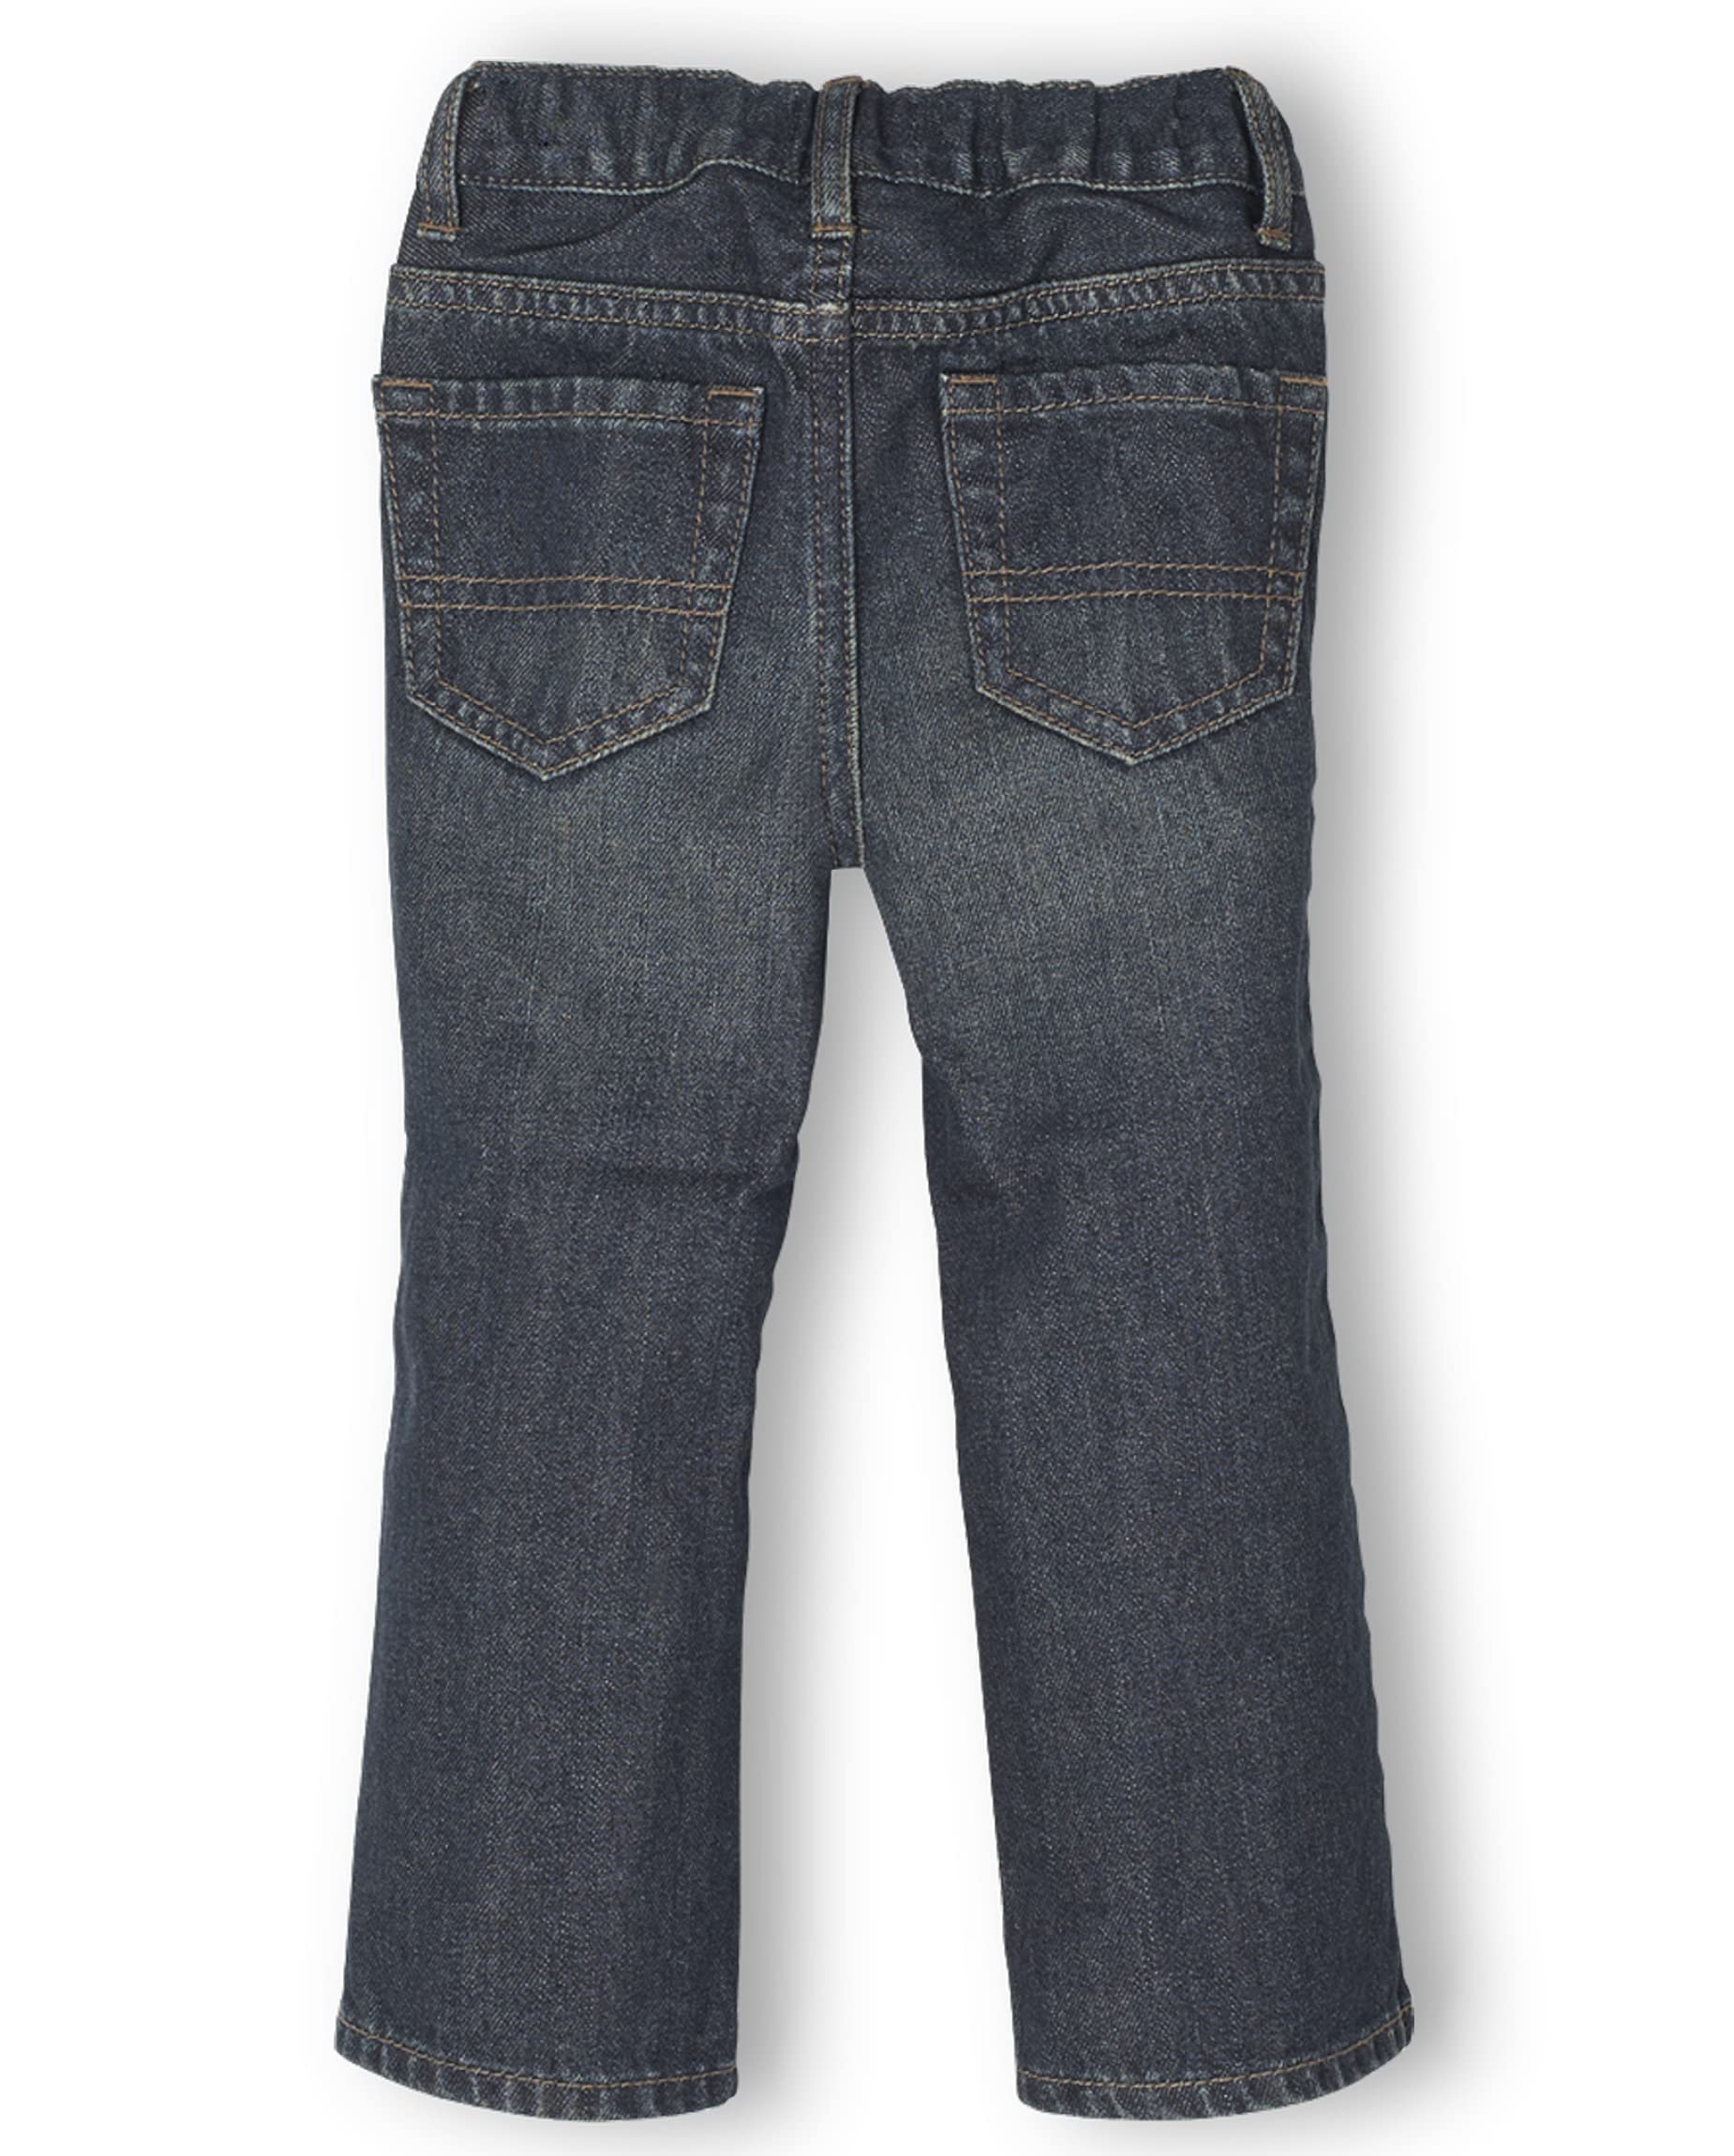 The Children's Place Single and Toddler Boys Basic Bootcut Jeans